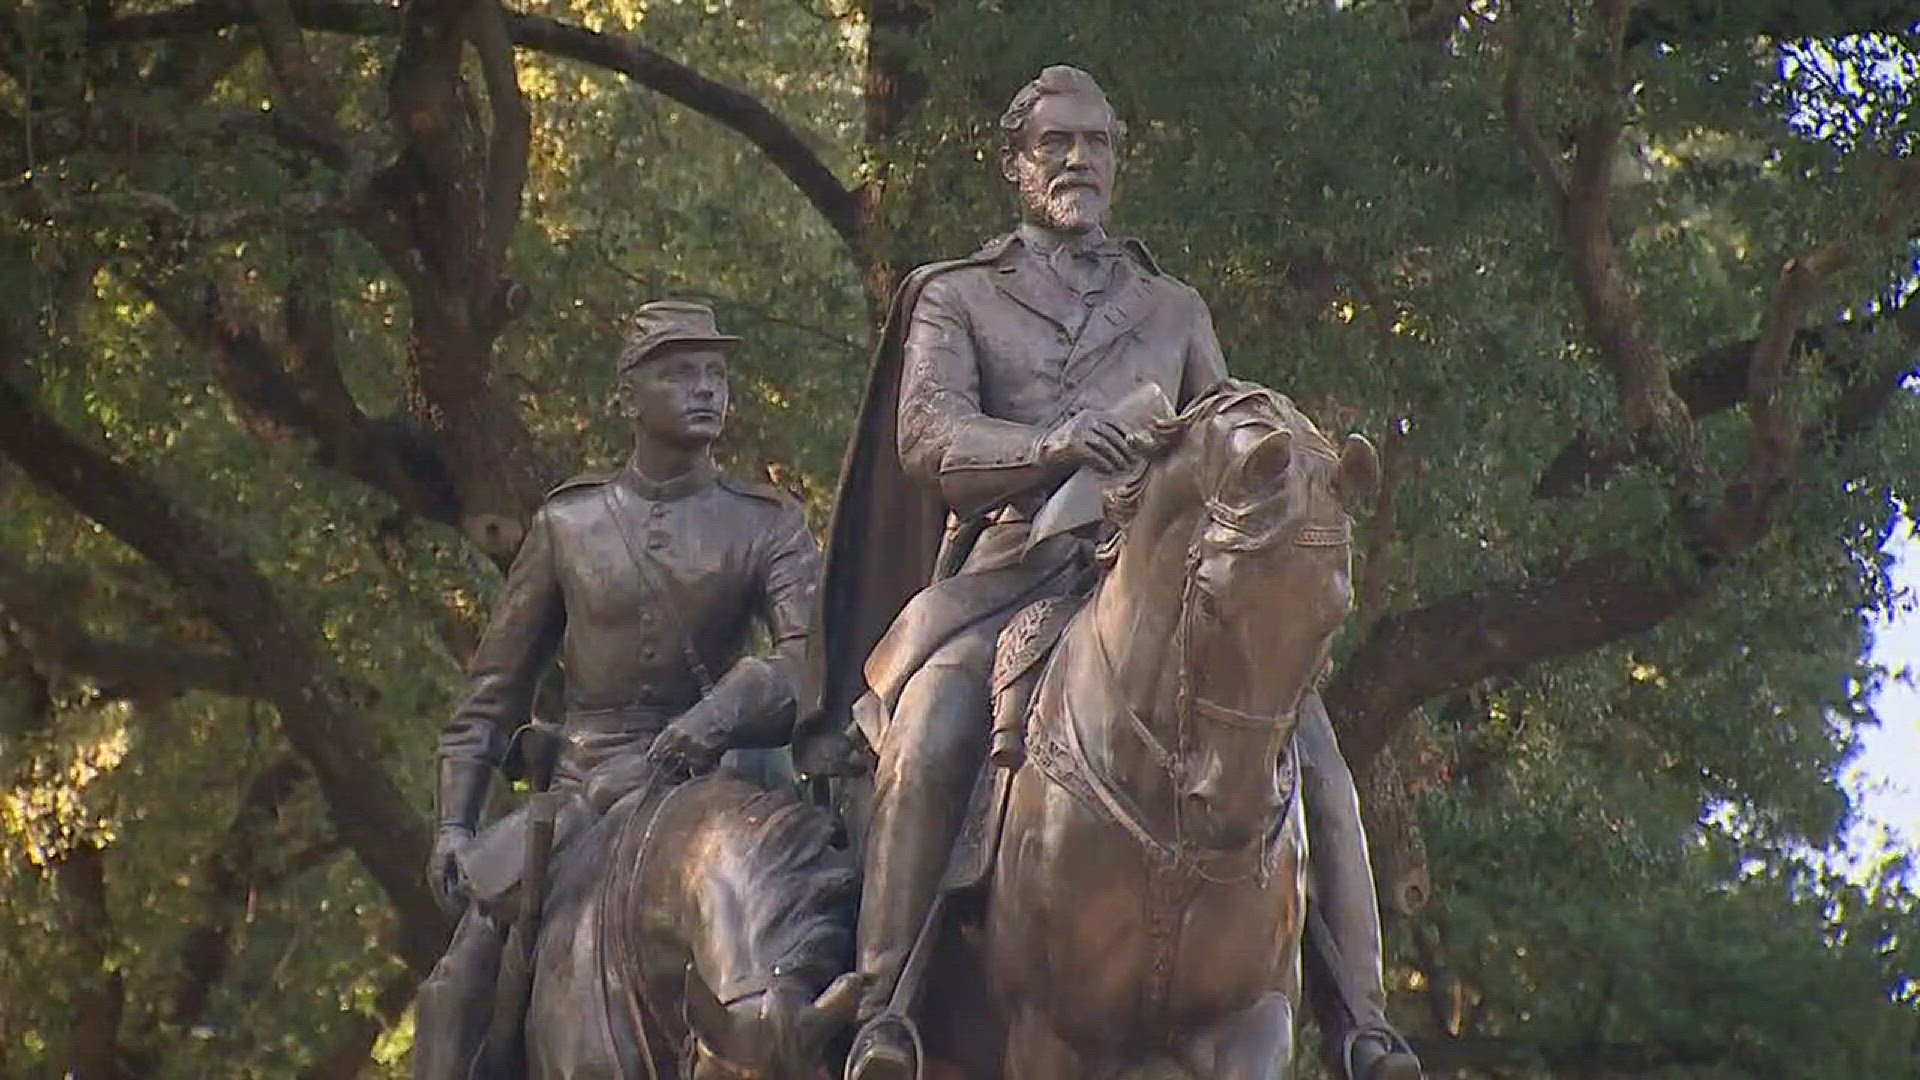 Dallas mayor calls for Confederate monument task force